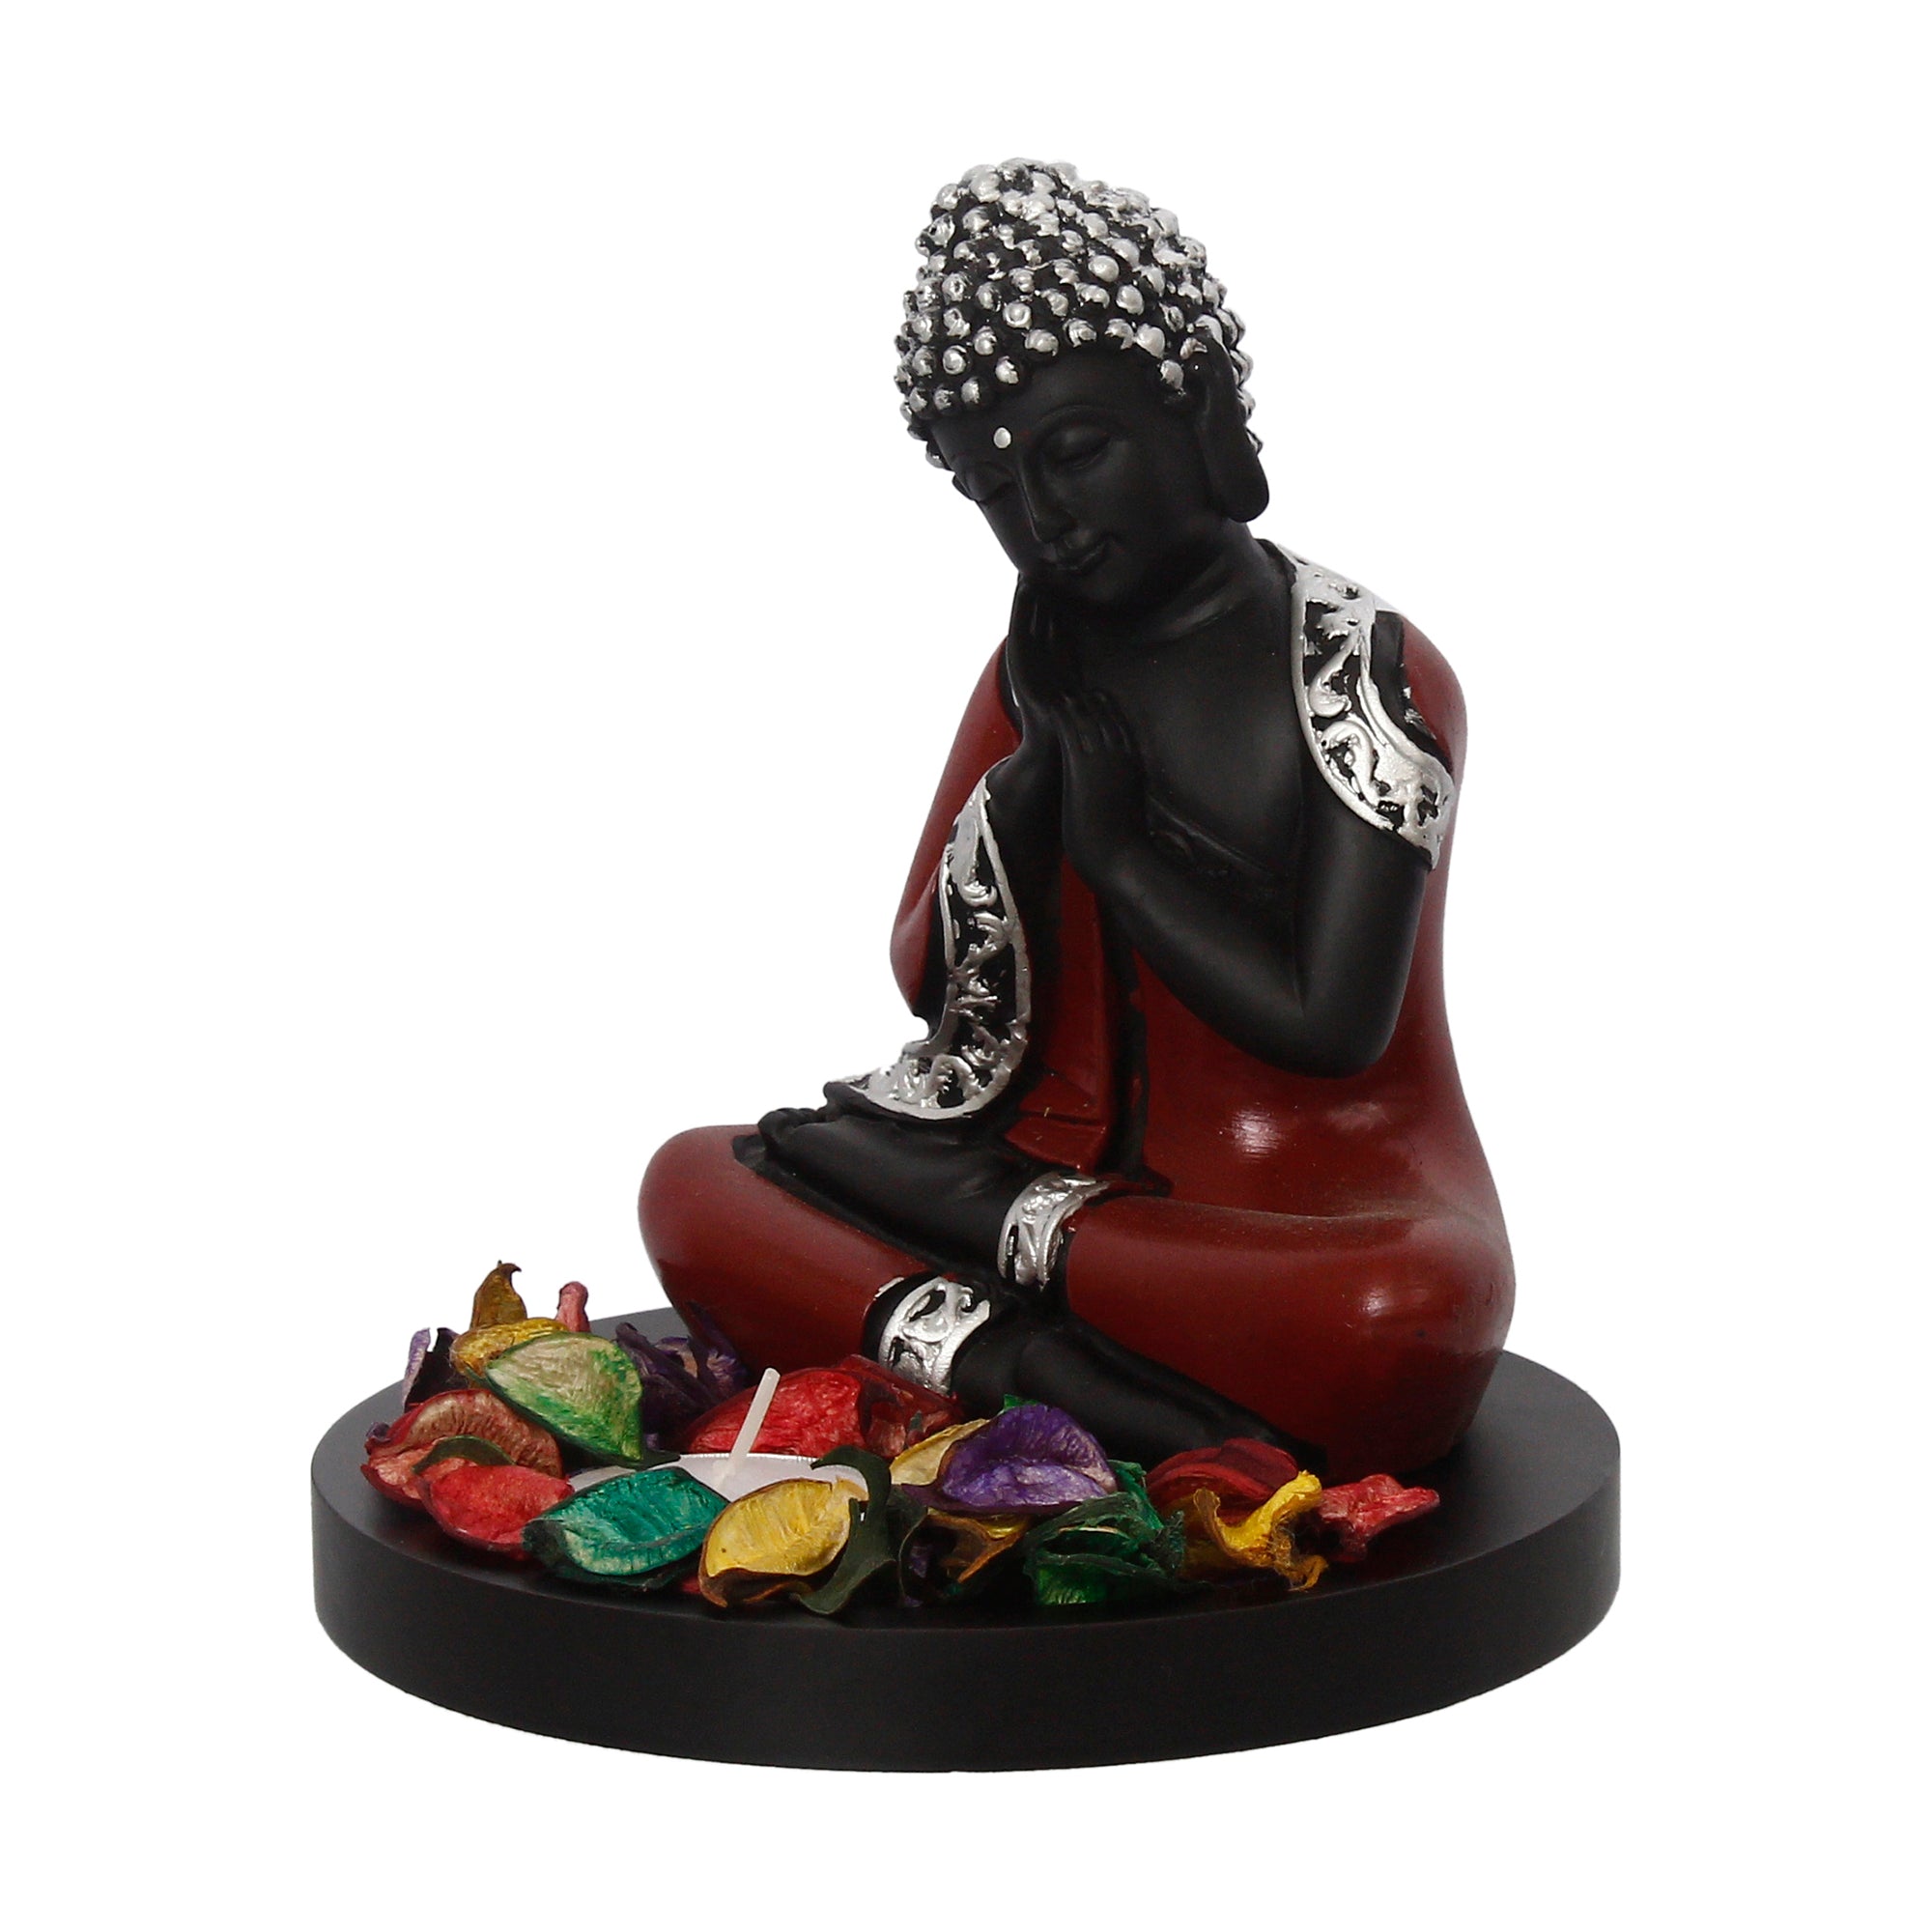 Polyresin Antique Finish Handcrafted Thinking Buddha Statue with Wooden Base, Fragranced Petals and Tealight (Red, Black and Silver) 5